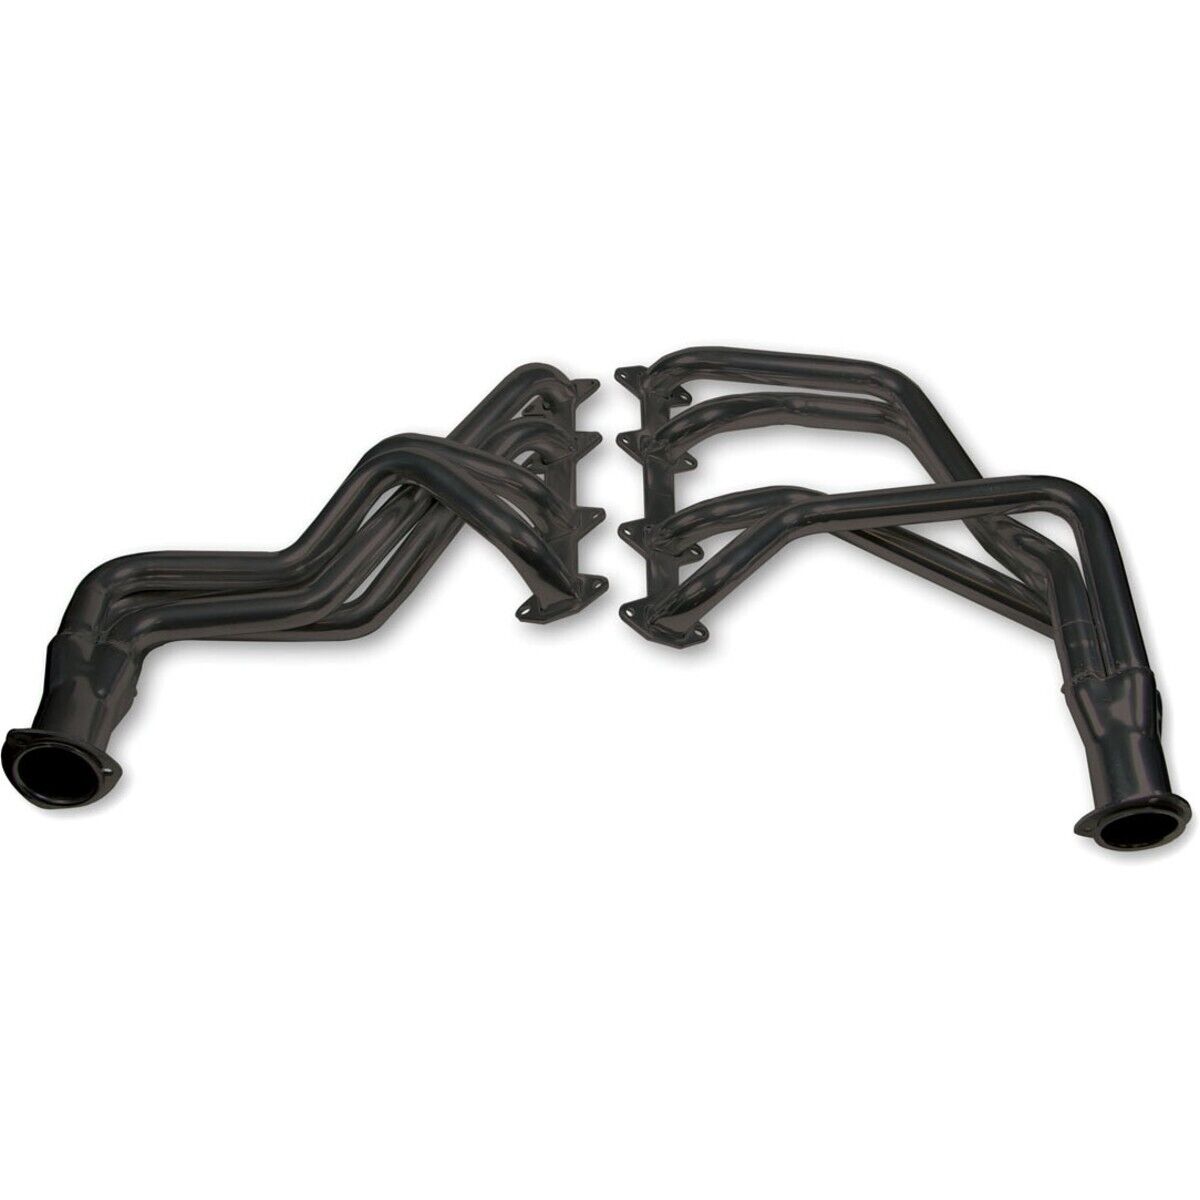 12542FLT Flowtech Set of 2 Headers for Truck F250 Ford F-250 F-100 65-76 Pair